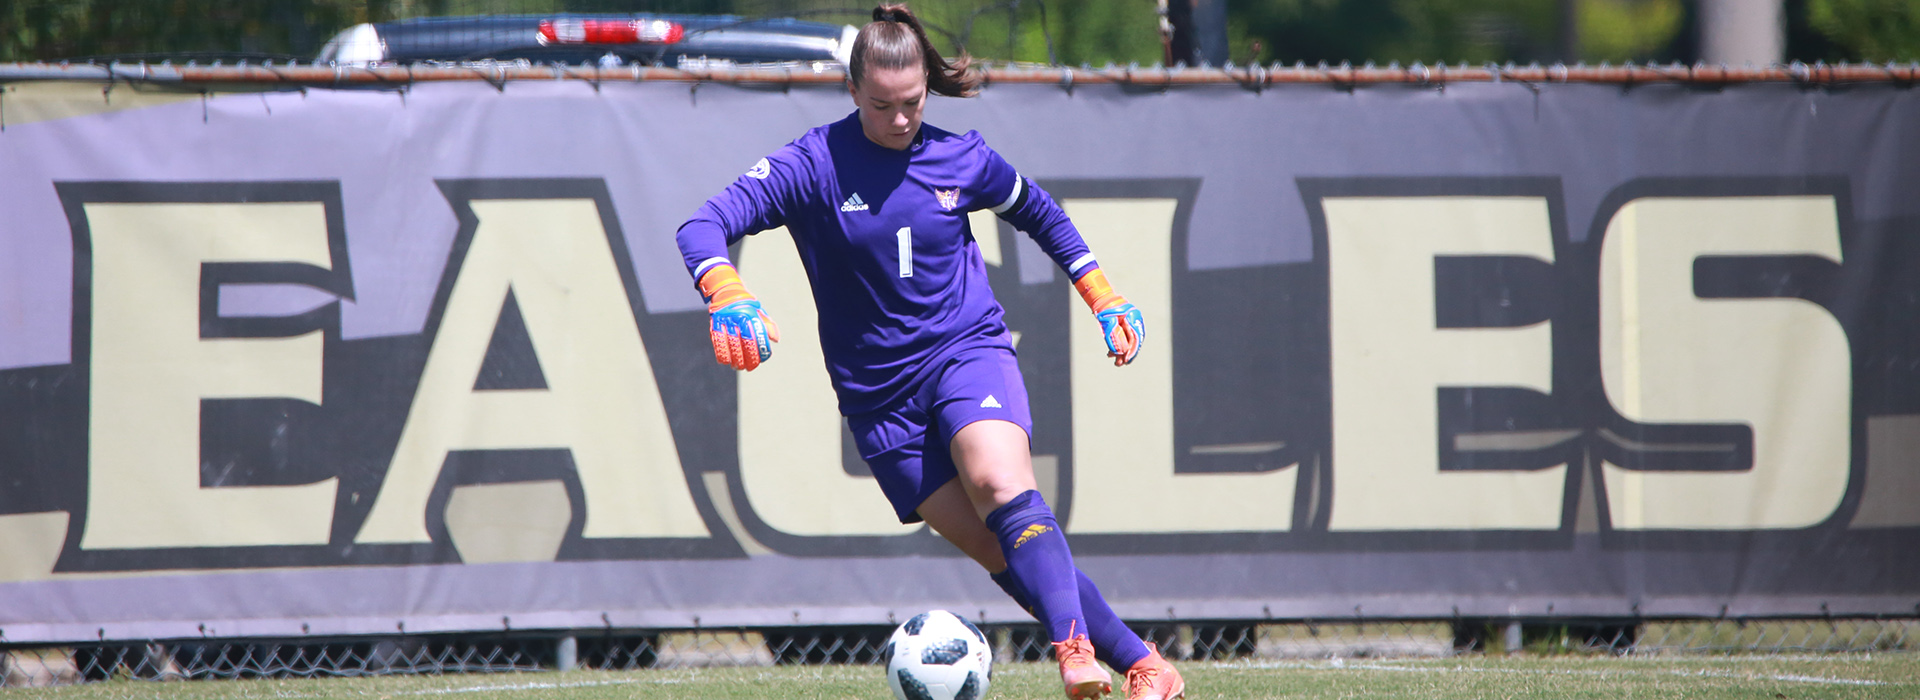 Golden Eagles open season with 1-0 win at Austin Peay